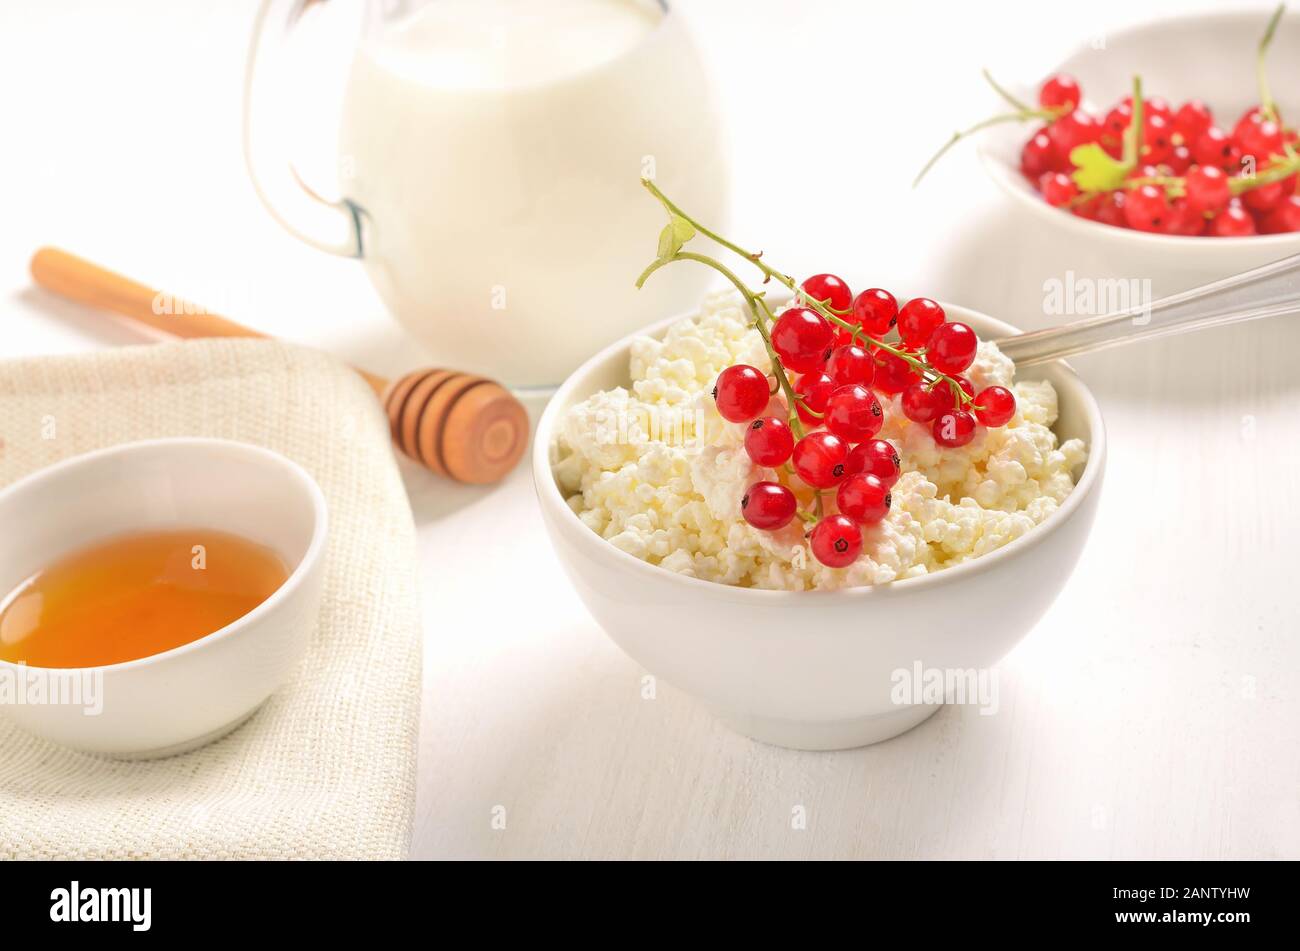 Cottage cheese and redcurrant in white bowl and honey on table, close up view Stock Photo